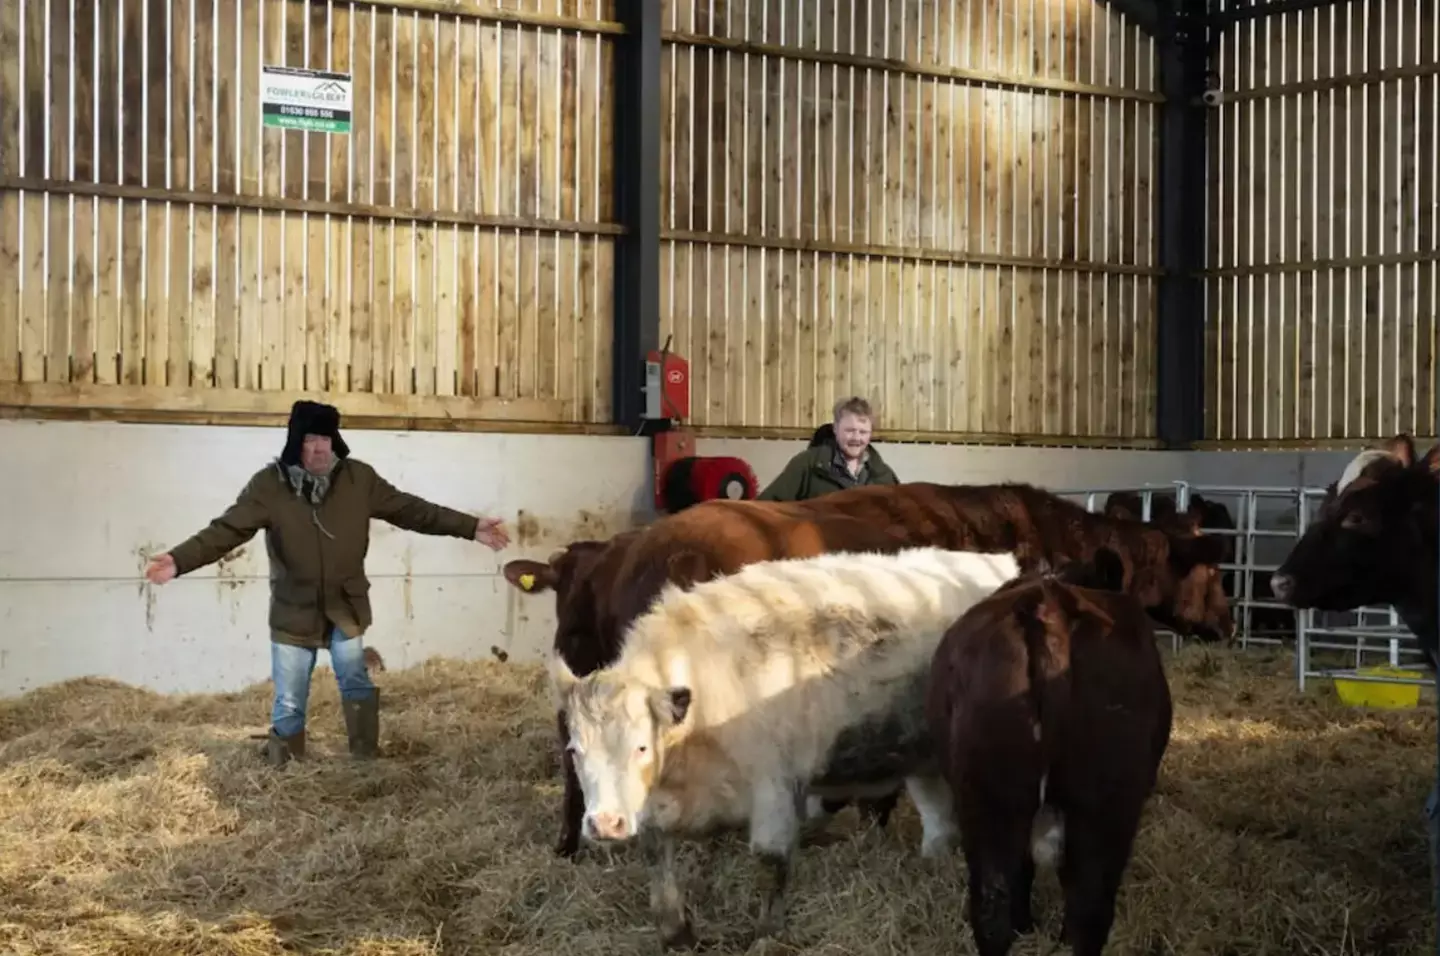 Viewers of Clarkson's Farm are reconsidering their use of animal products.